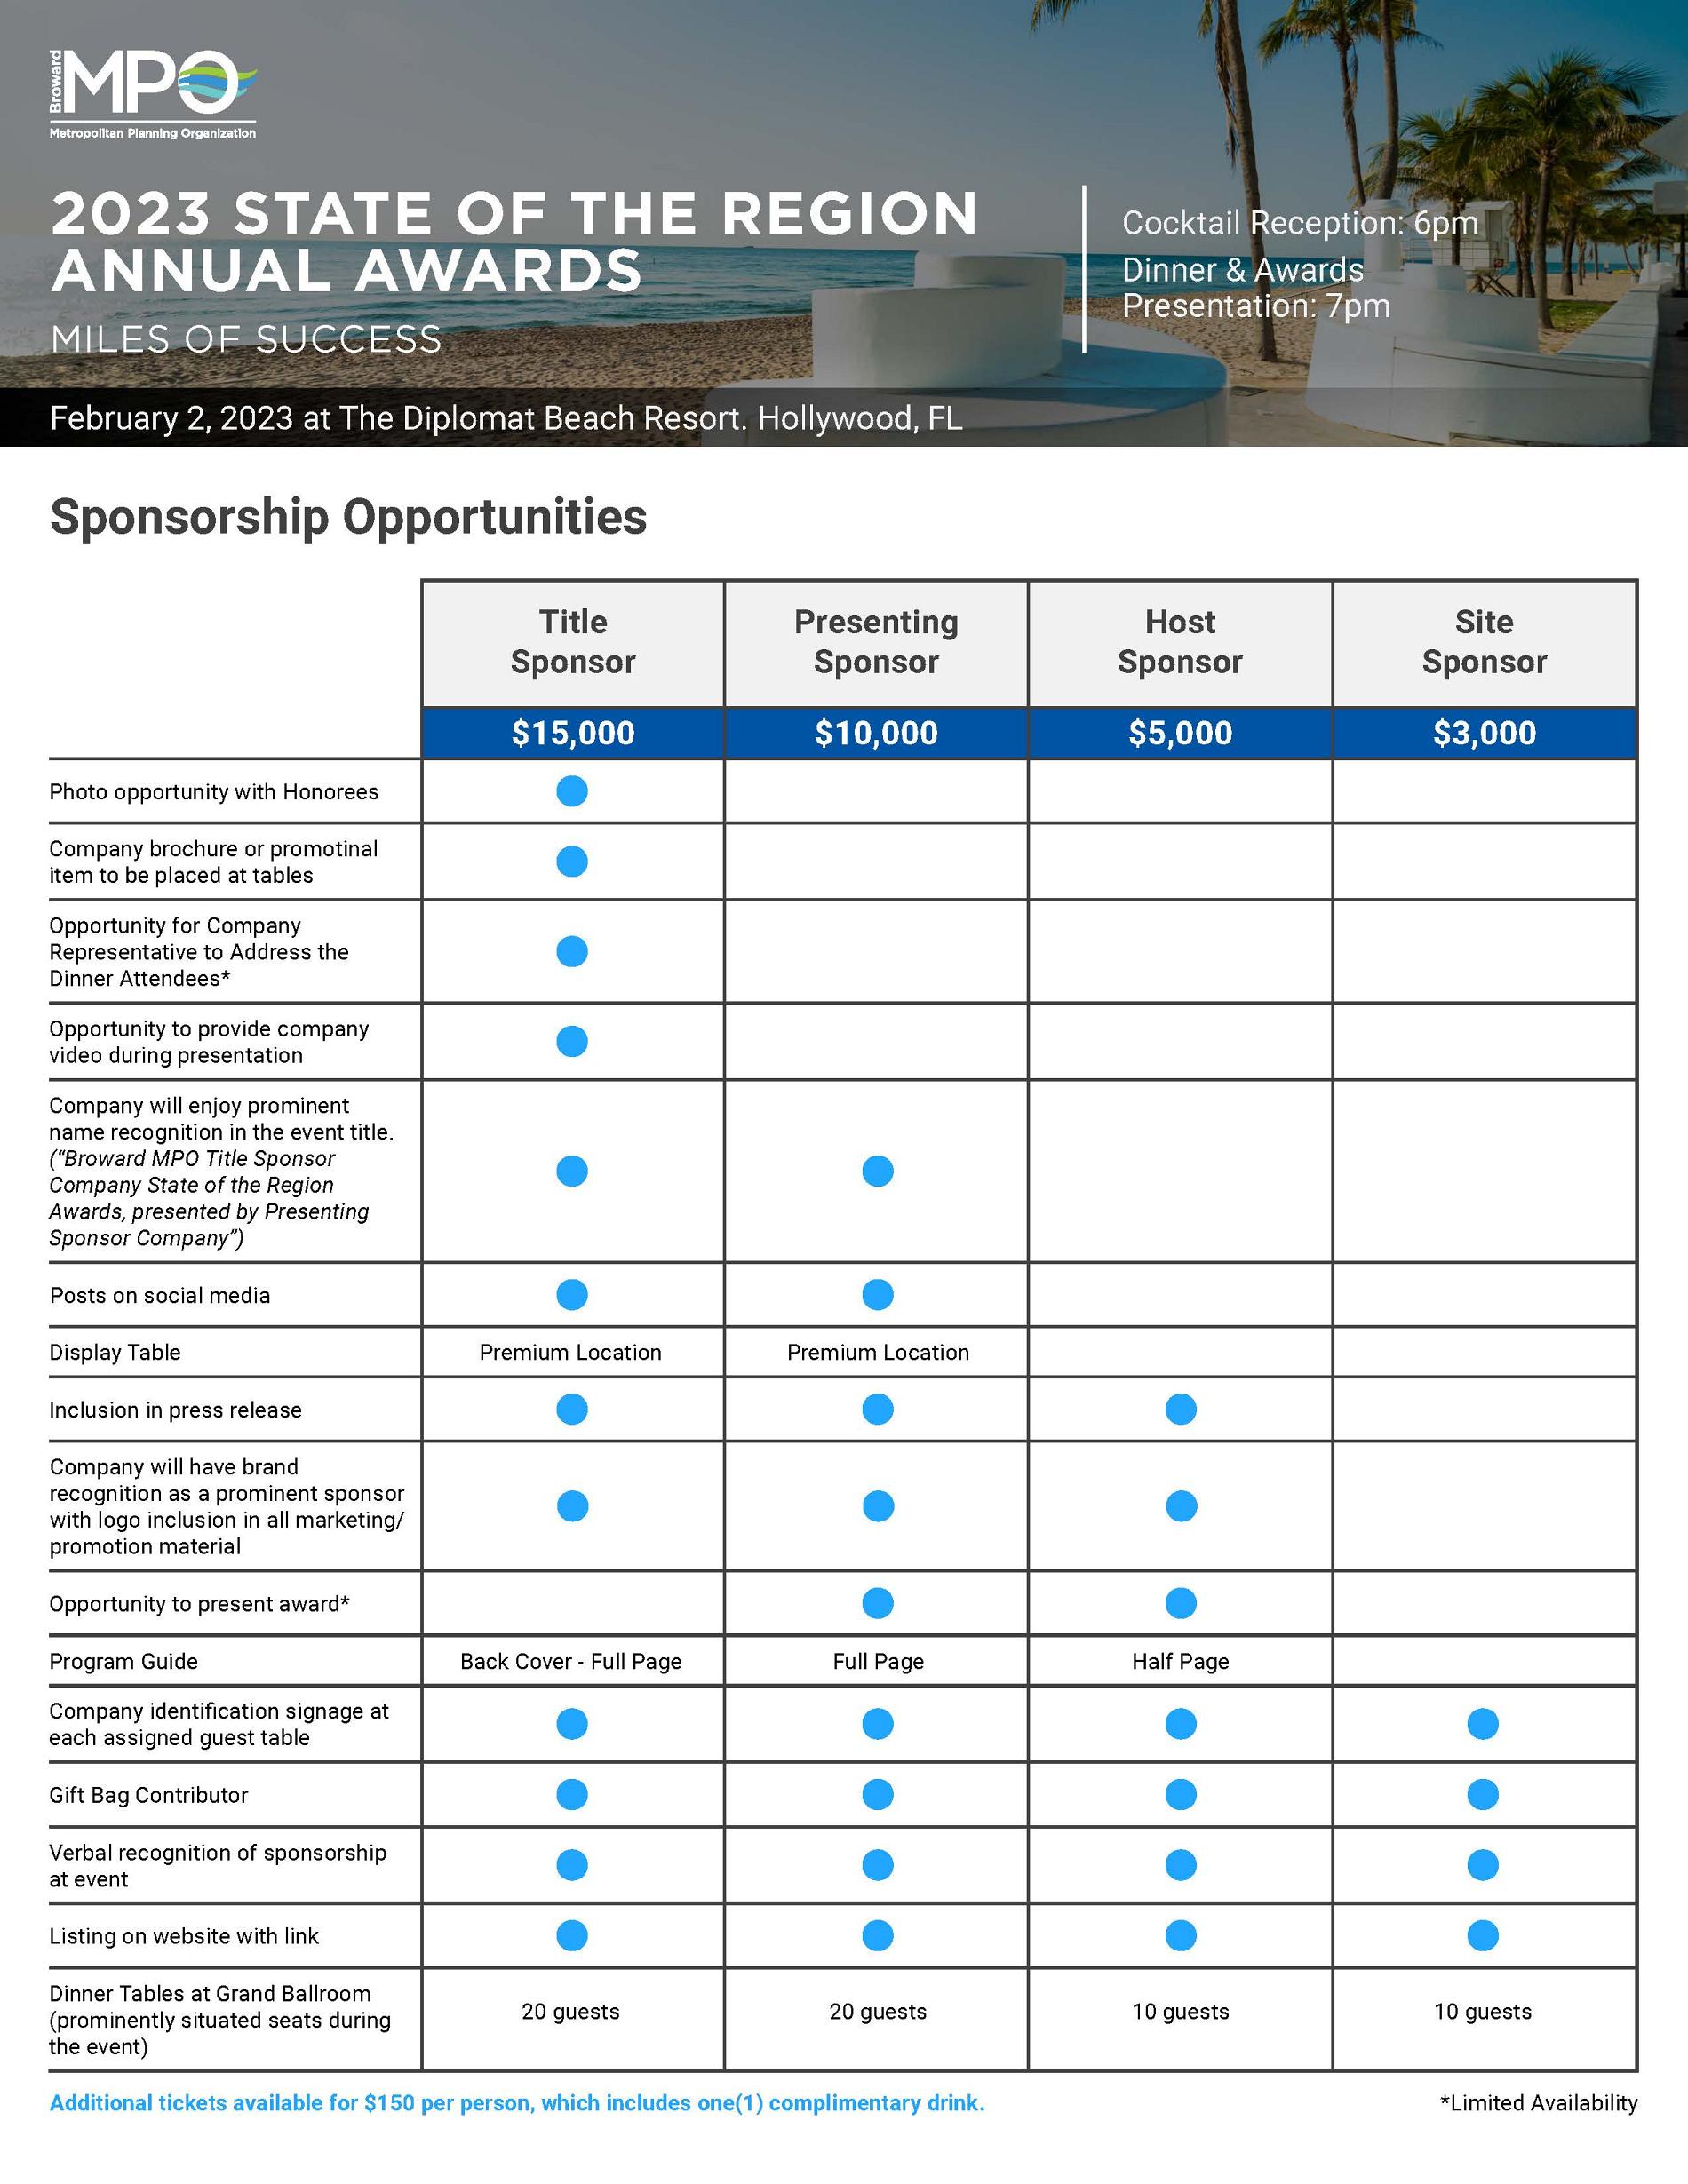 BMPO AnnualAwards SponsorshipOpportunities 1 Page 2